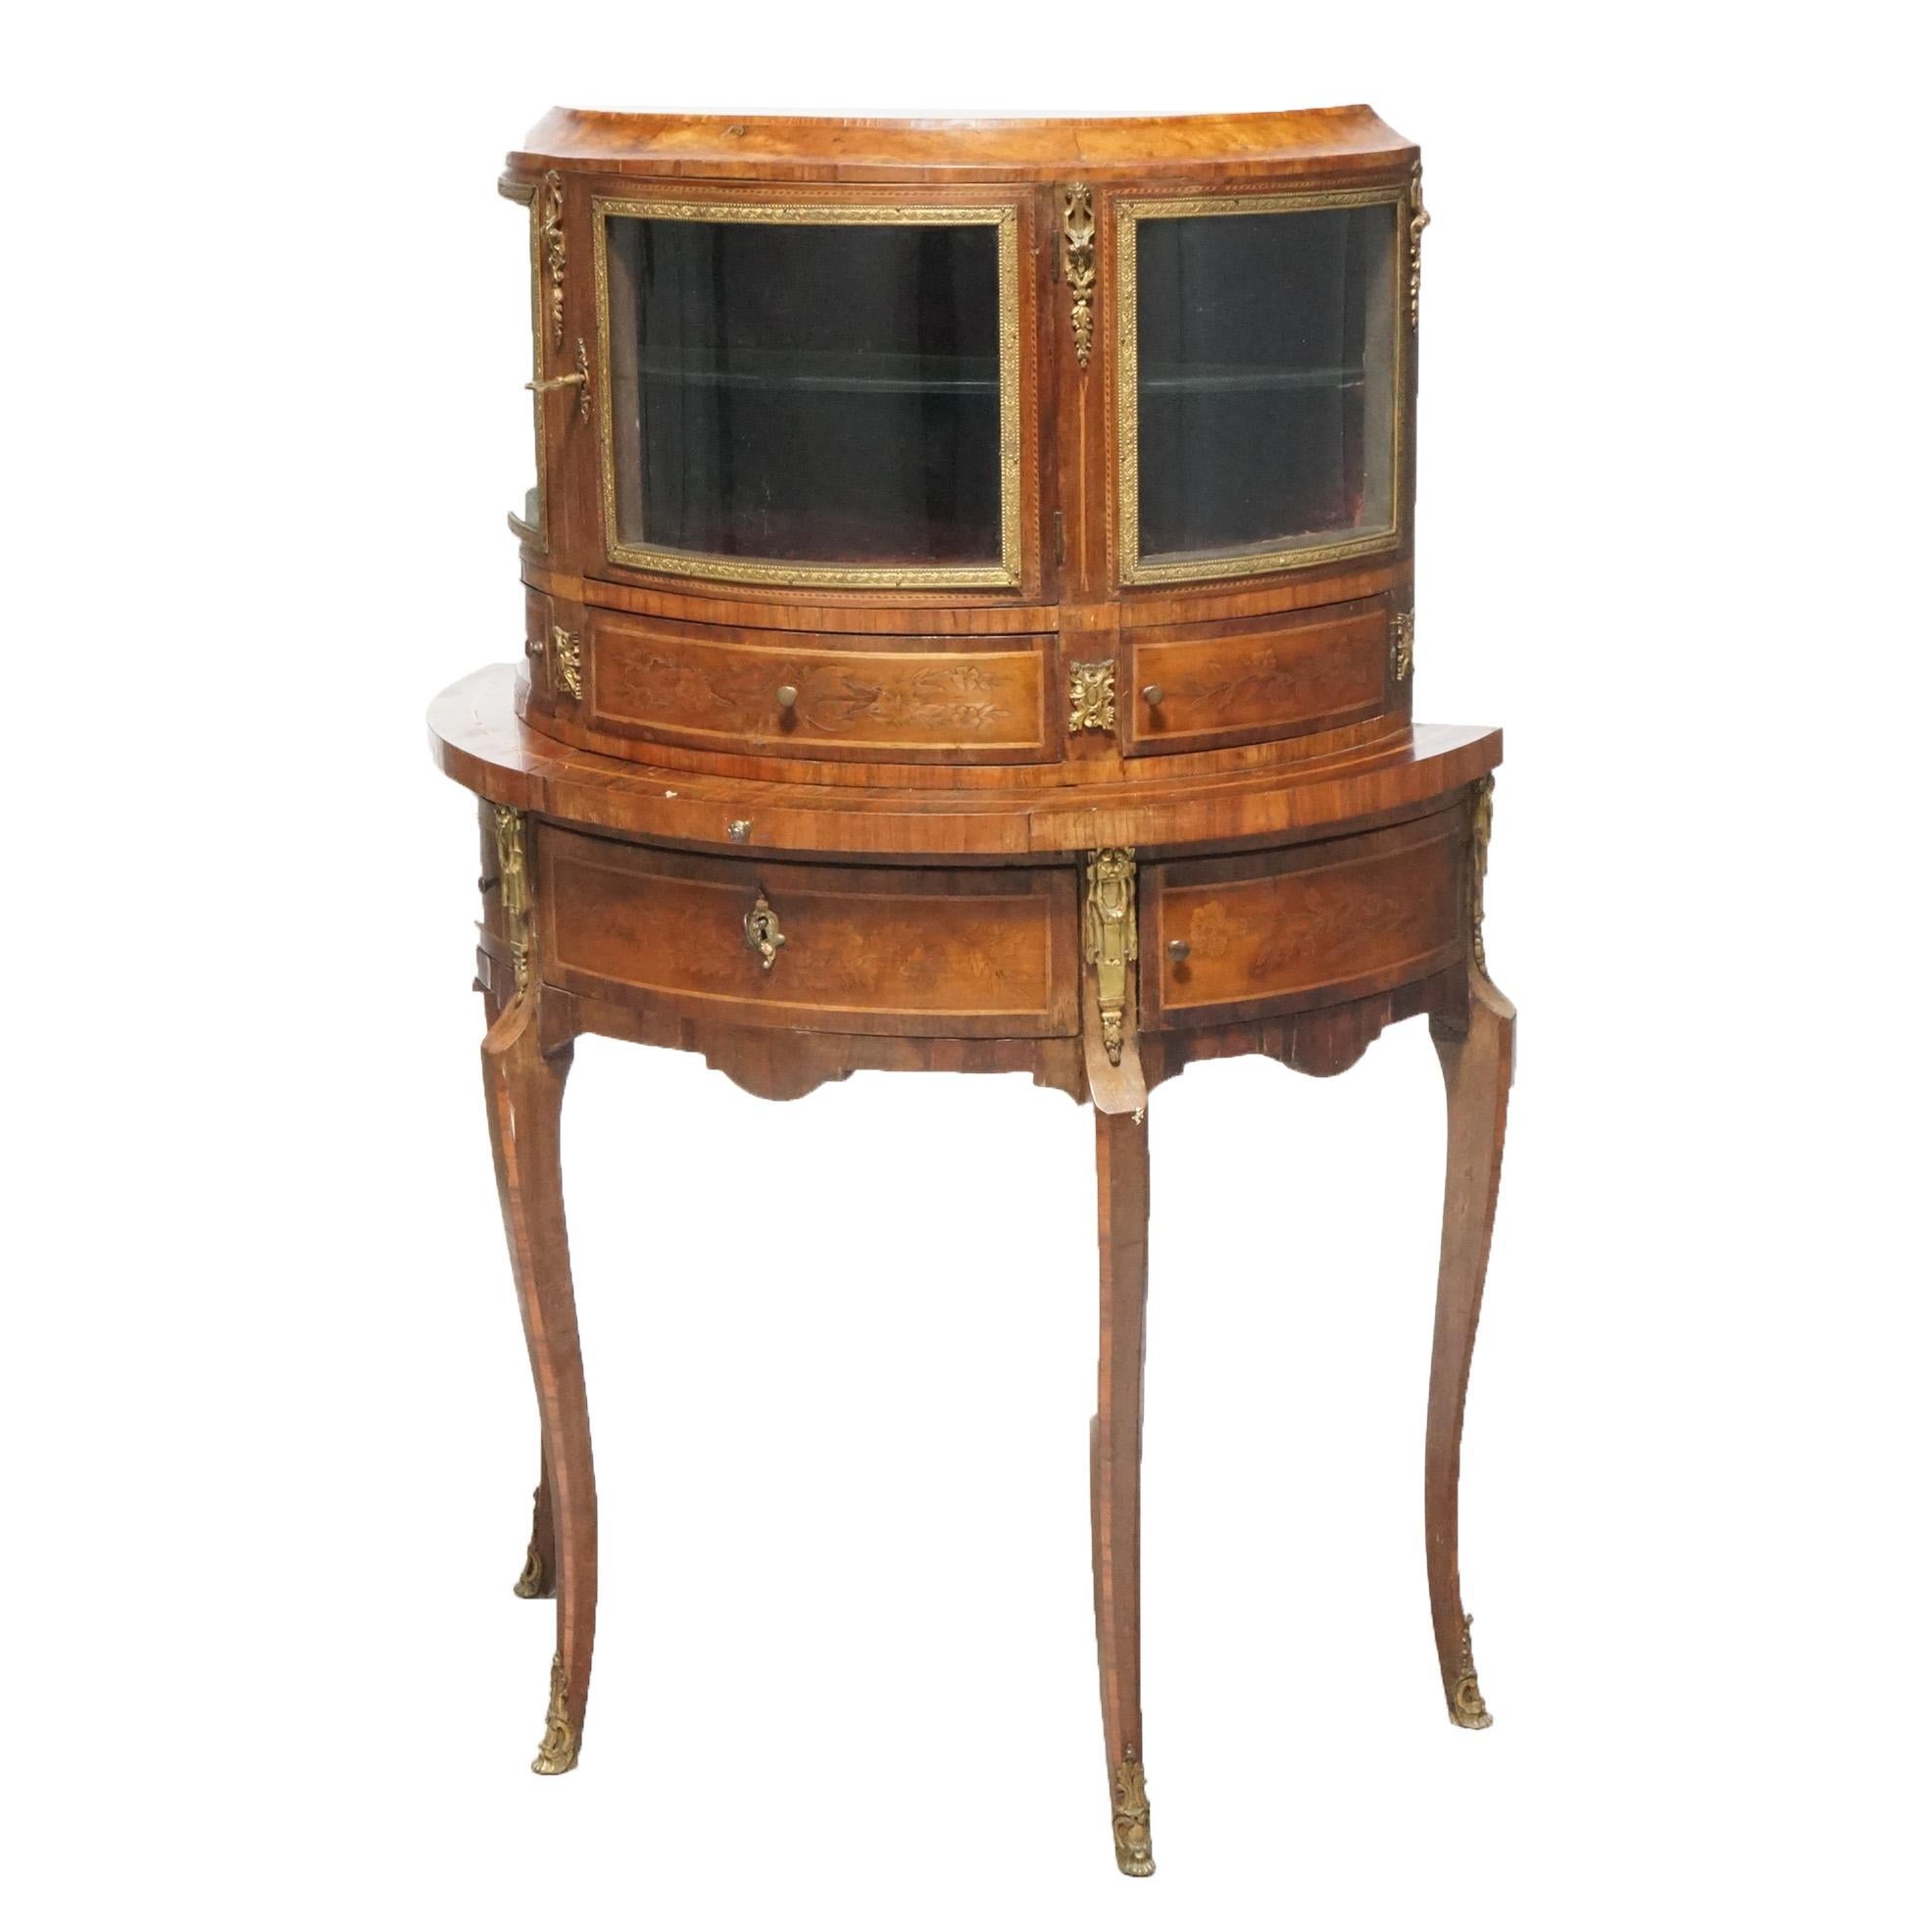 An antique French Louis XVI ladies secretary offers kingwood construction with satinwood marquetry and banded inlay in demilune form with upper display vitrine having curved glass and shelved interior over case with pull out writing tray and